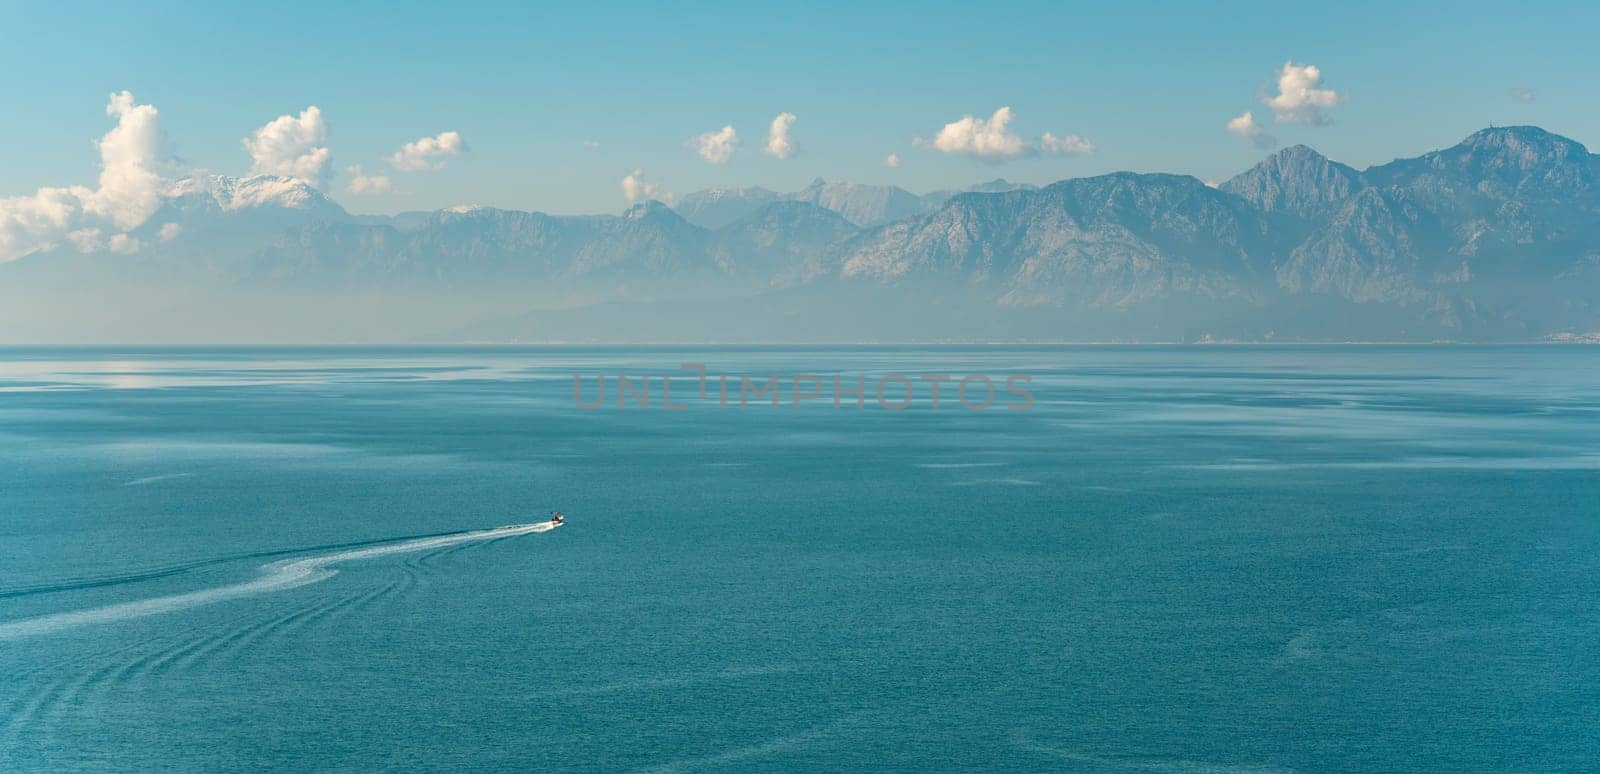 Antalya landscape with a boat sailing on the sea and mountains in the background by Sonat